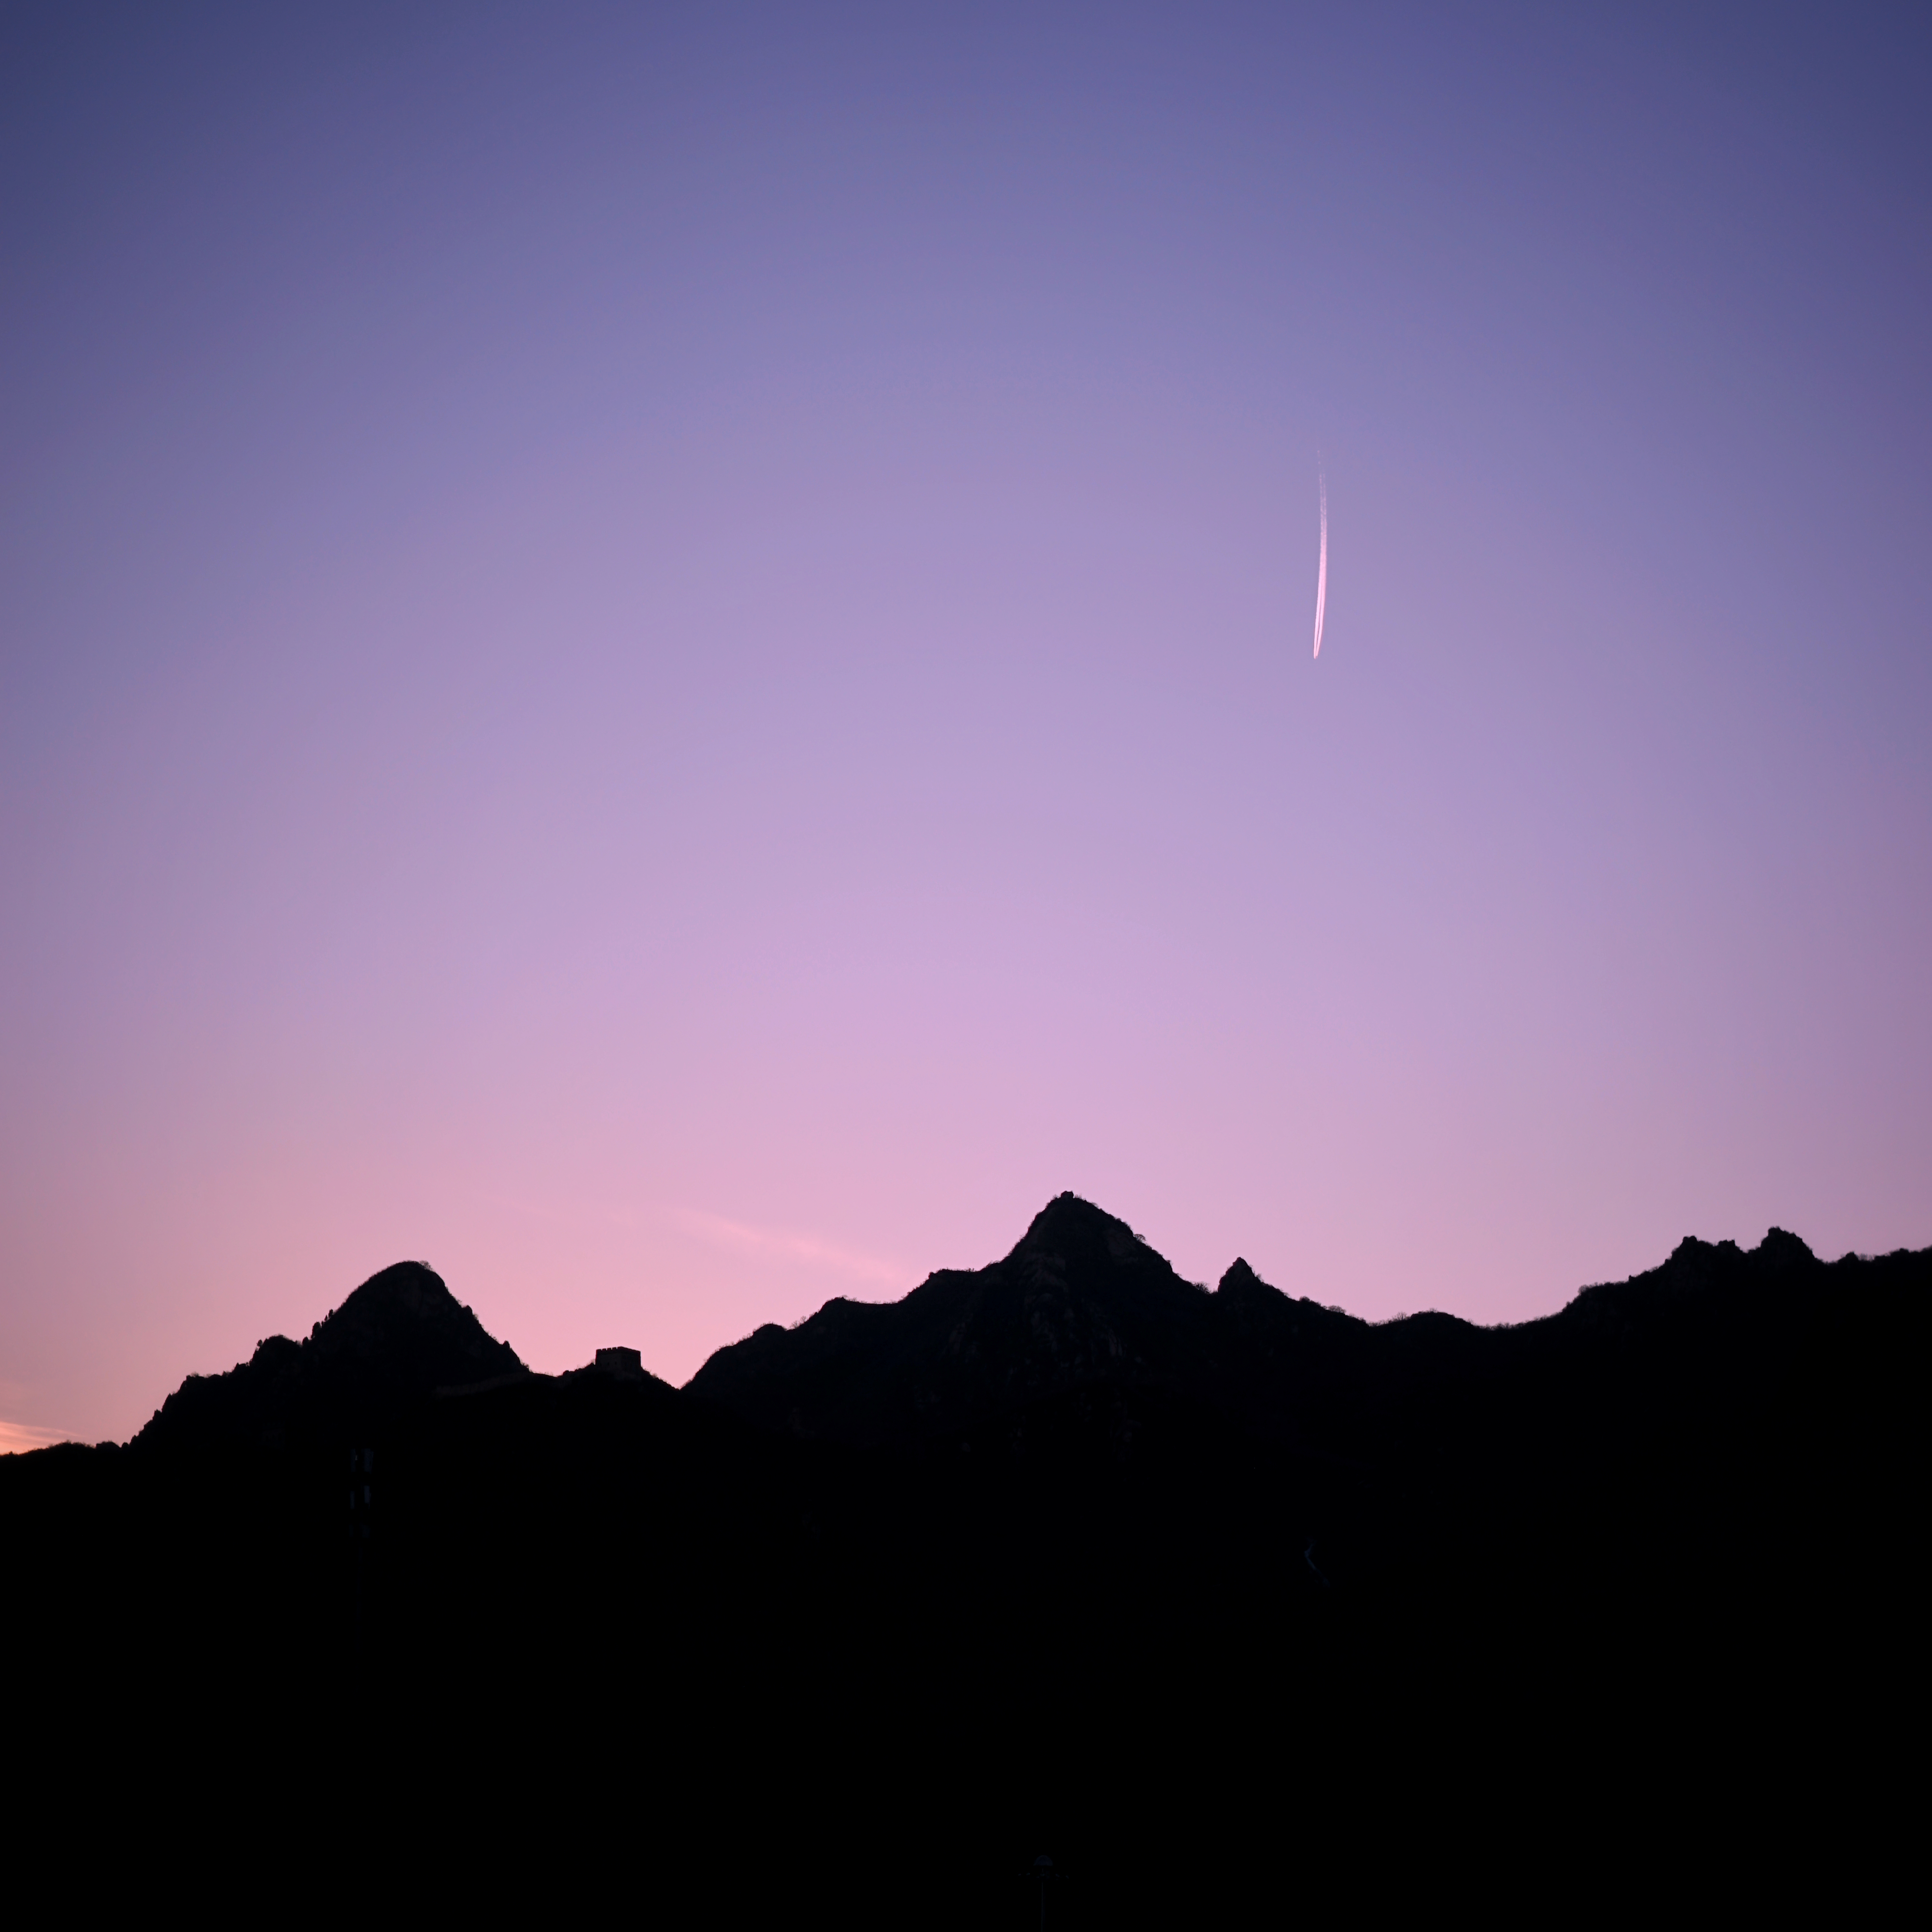 Dusk Chemtrails Silhouette Mountains 4000x4000